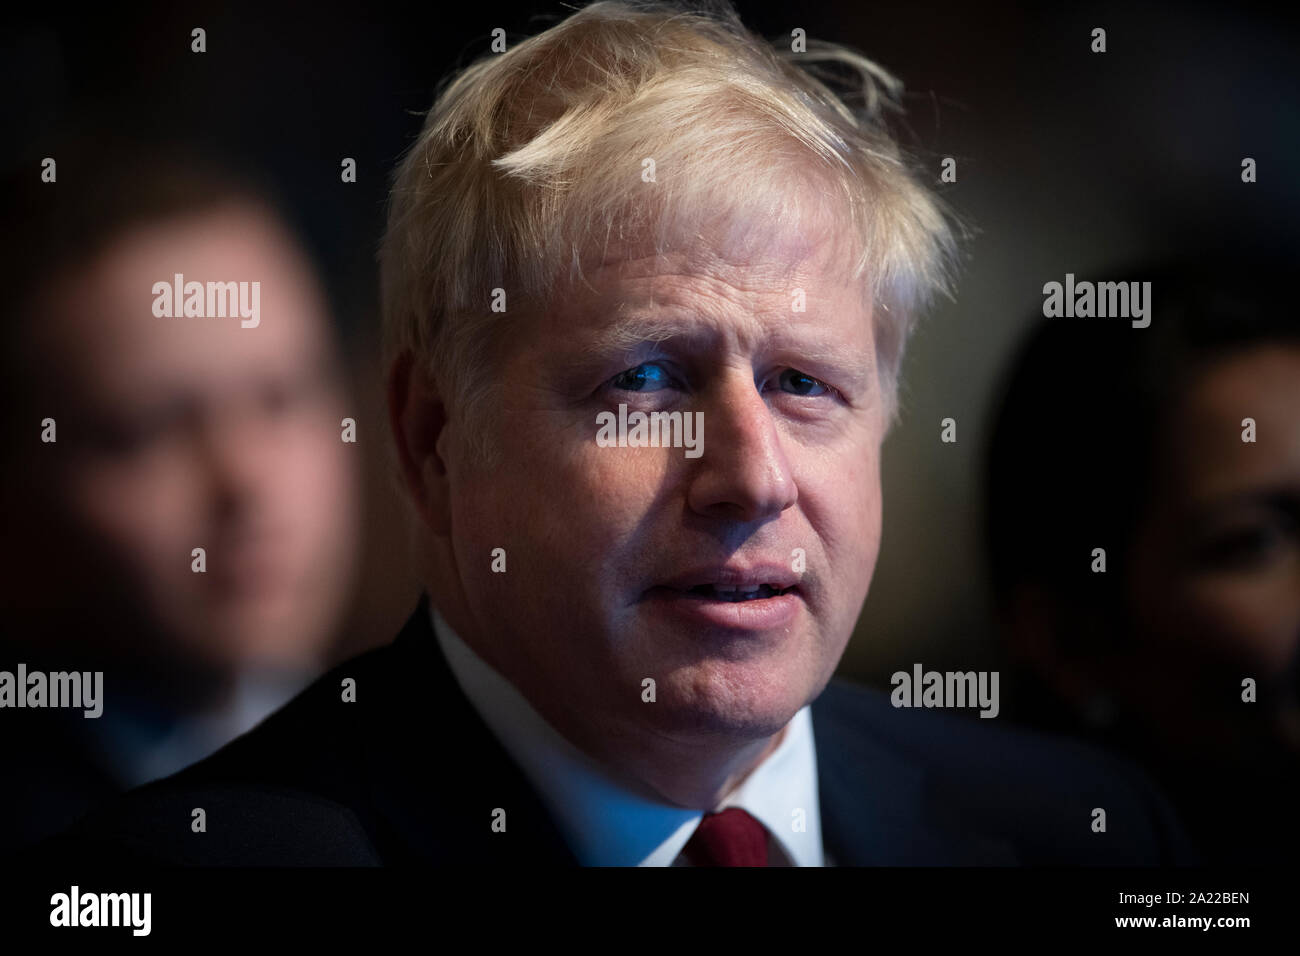 Manchester, UK. 30th September 2019. Boris Johnson, Prime Minister, First Lord of the Treasury, Minister for the Civil Service and MP for Uxbridge and South Ruislip, attends day two of the Conservative Party Conference in Manchester. © Russell Hart/Alamy Live News. Stock Photo